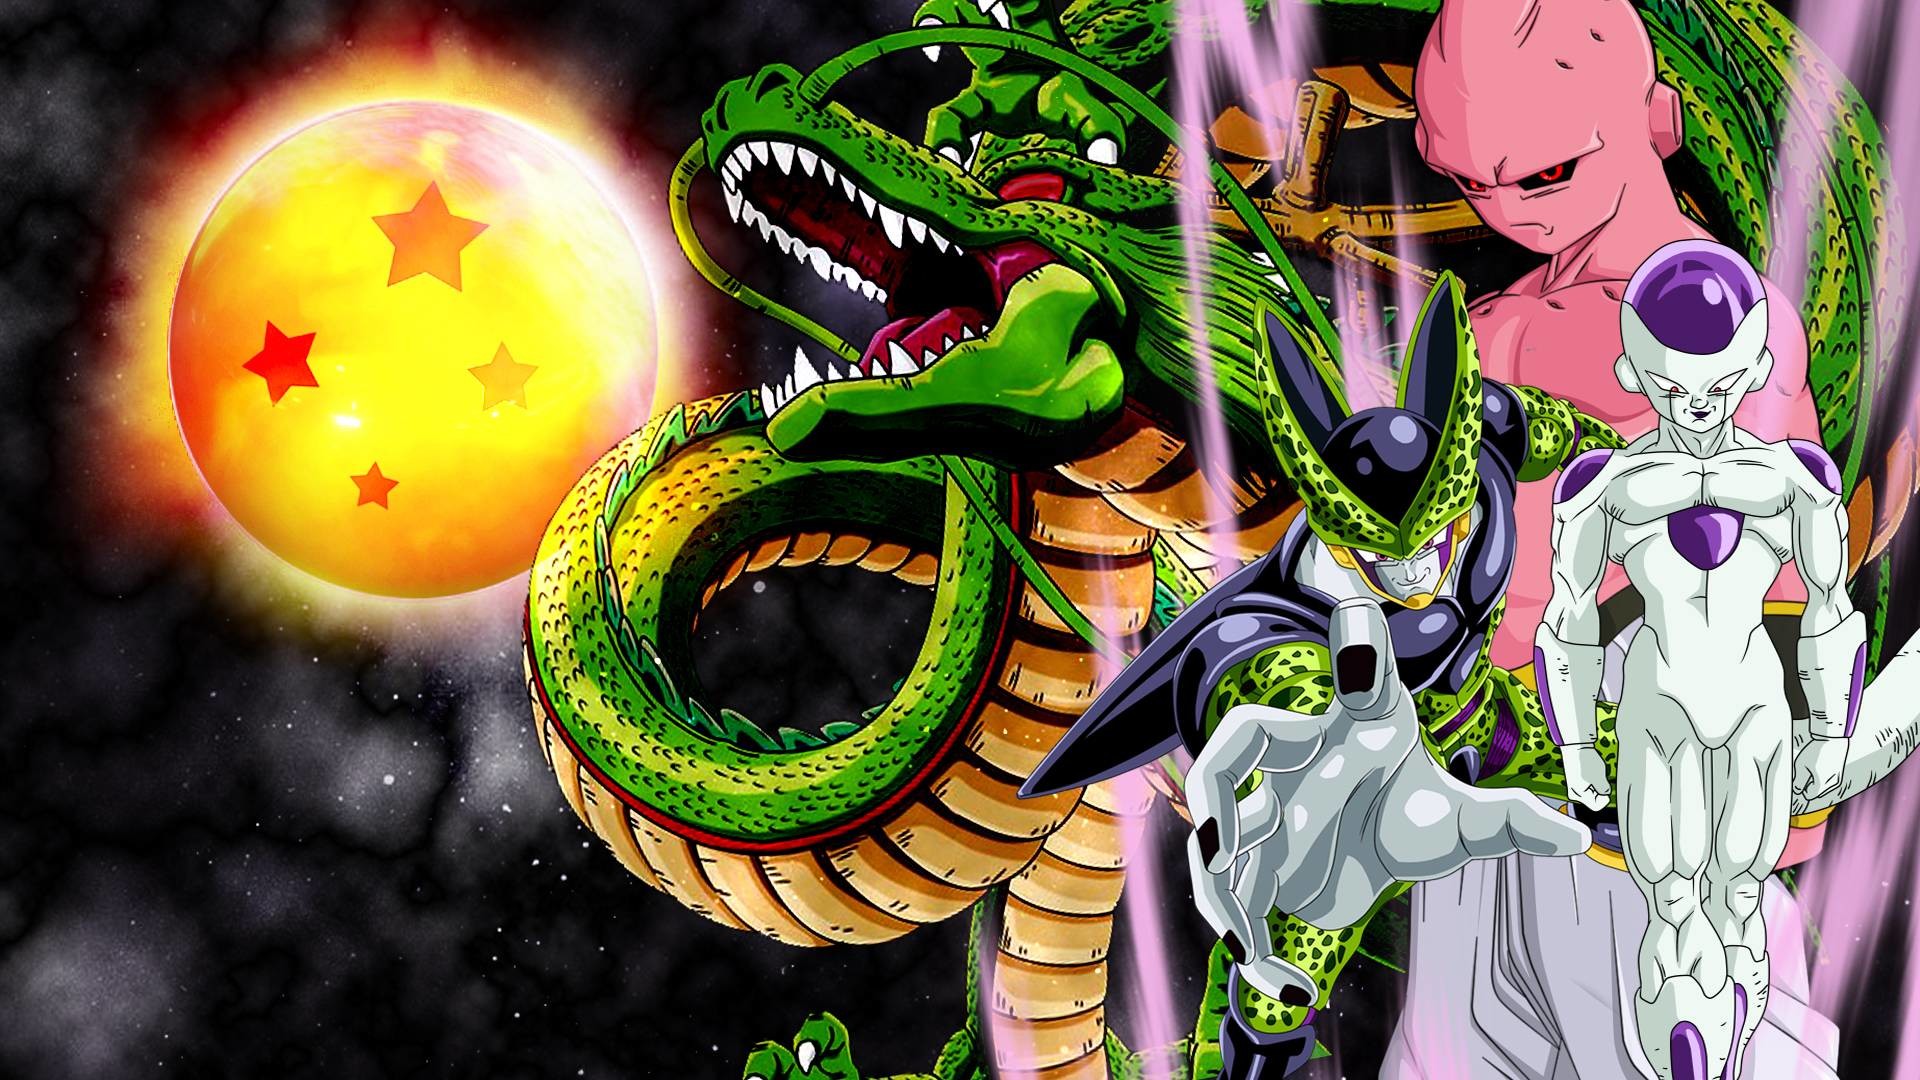 1920x1080 Frieza, cell and buu wallpaper by vuLC4no on DeviantArt